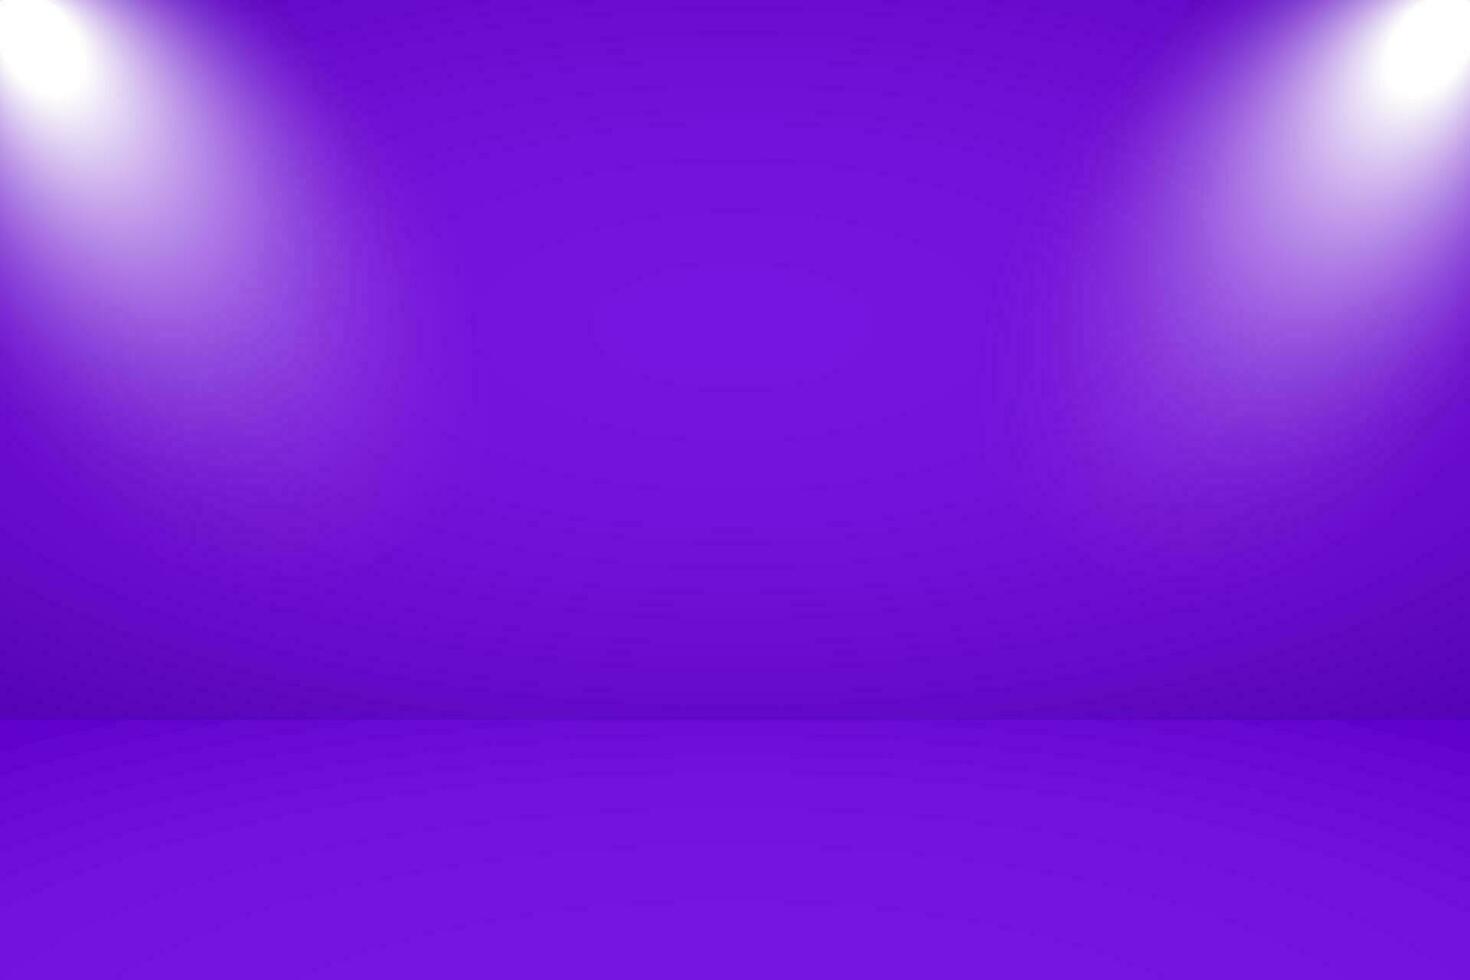 Vector illustration of empty studio with lighting and magenta background for product display